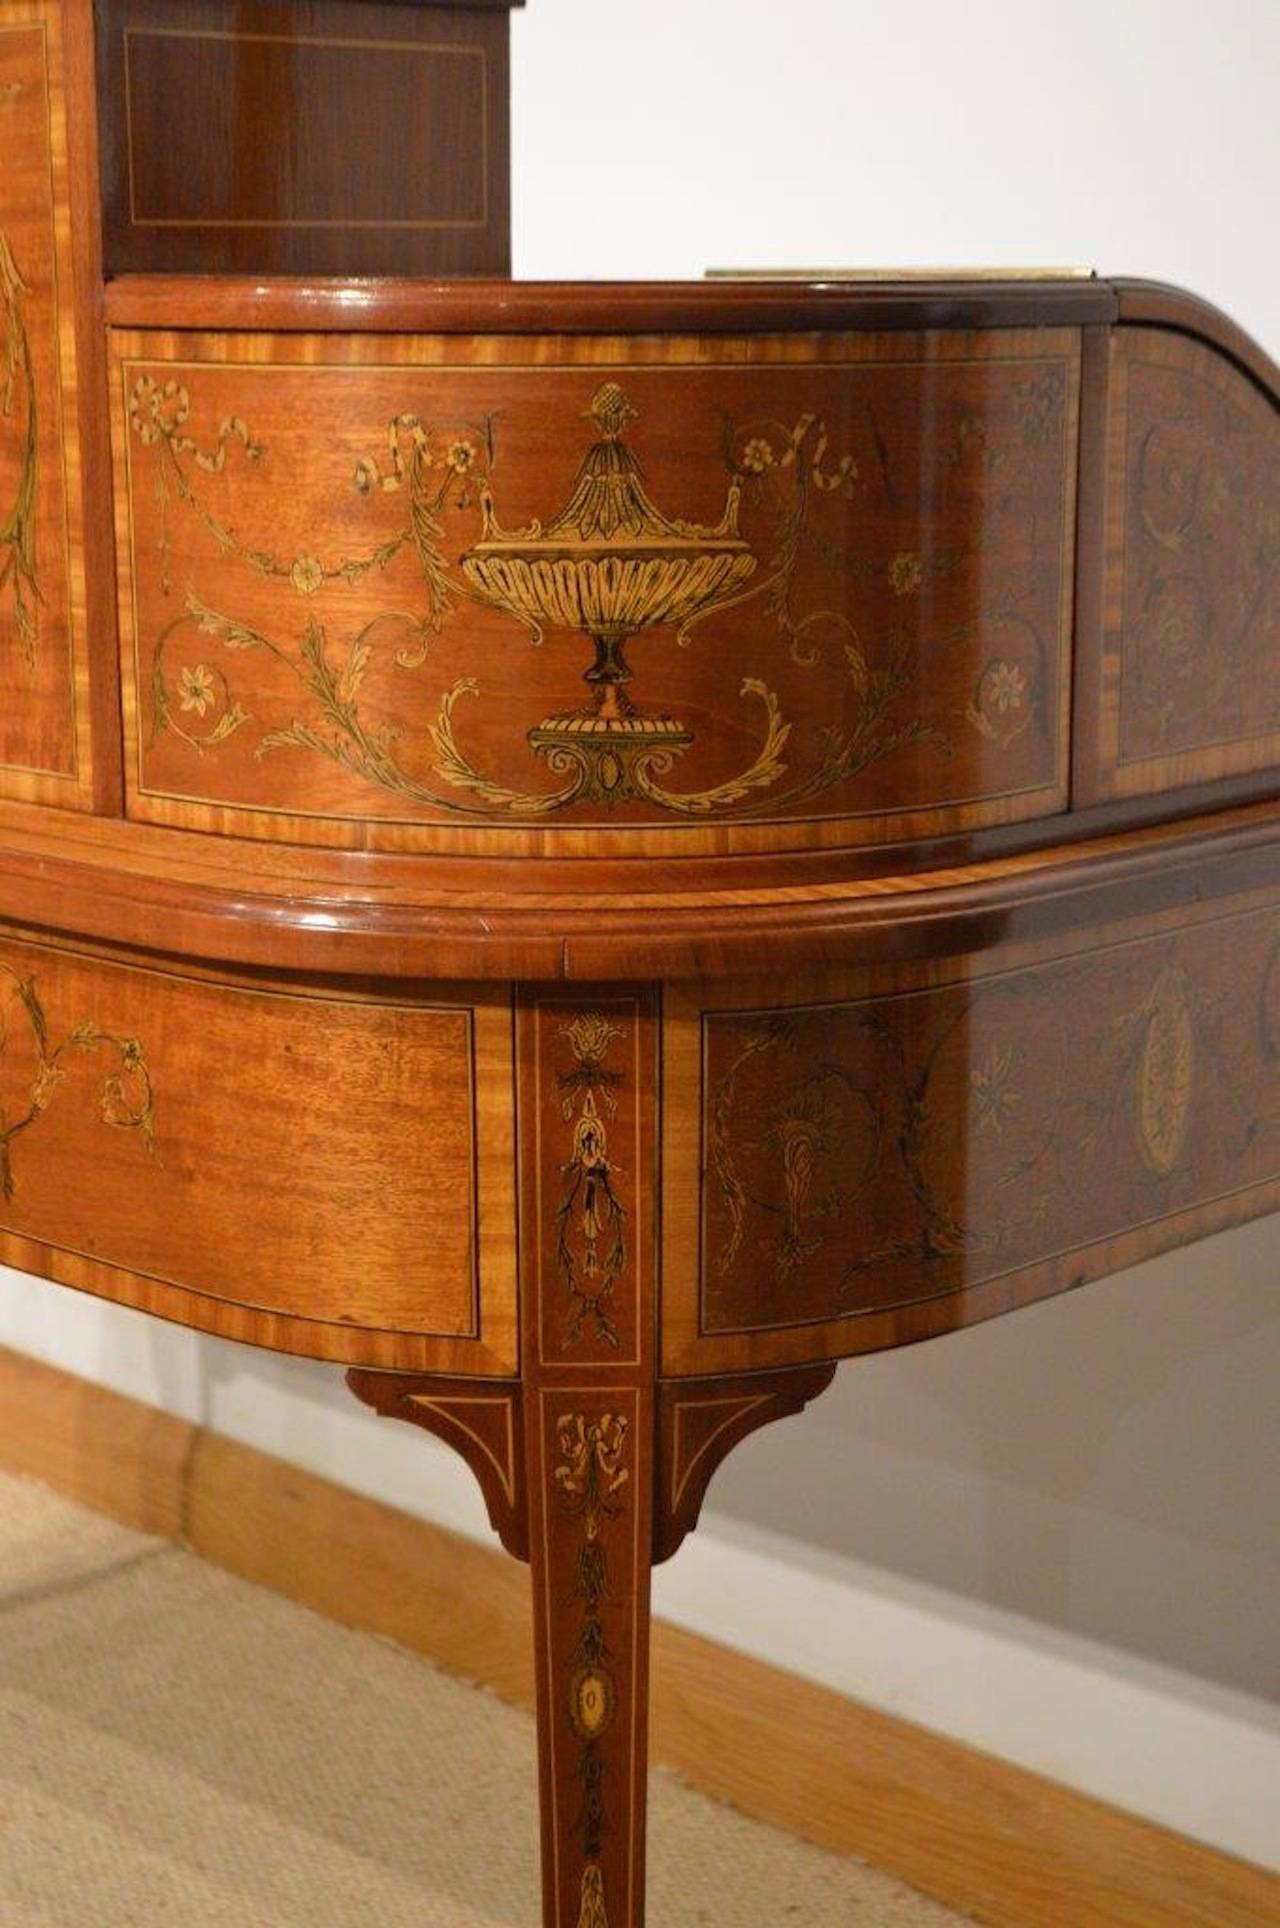 Late Victorian Stunning Quality Marquetry Inlaid Sheraton Revival Carlton House Desk